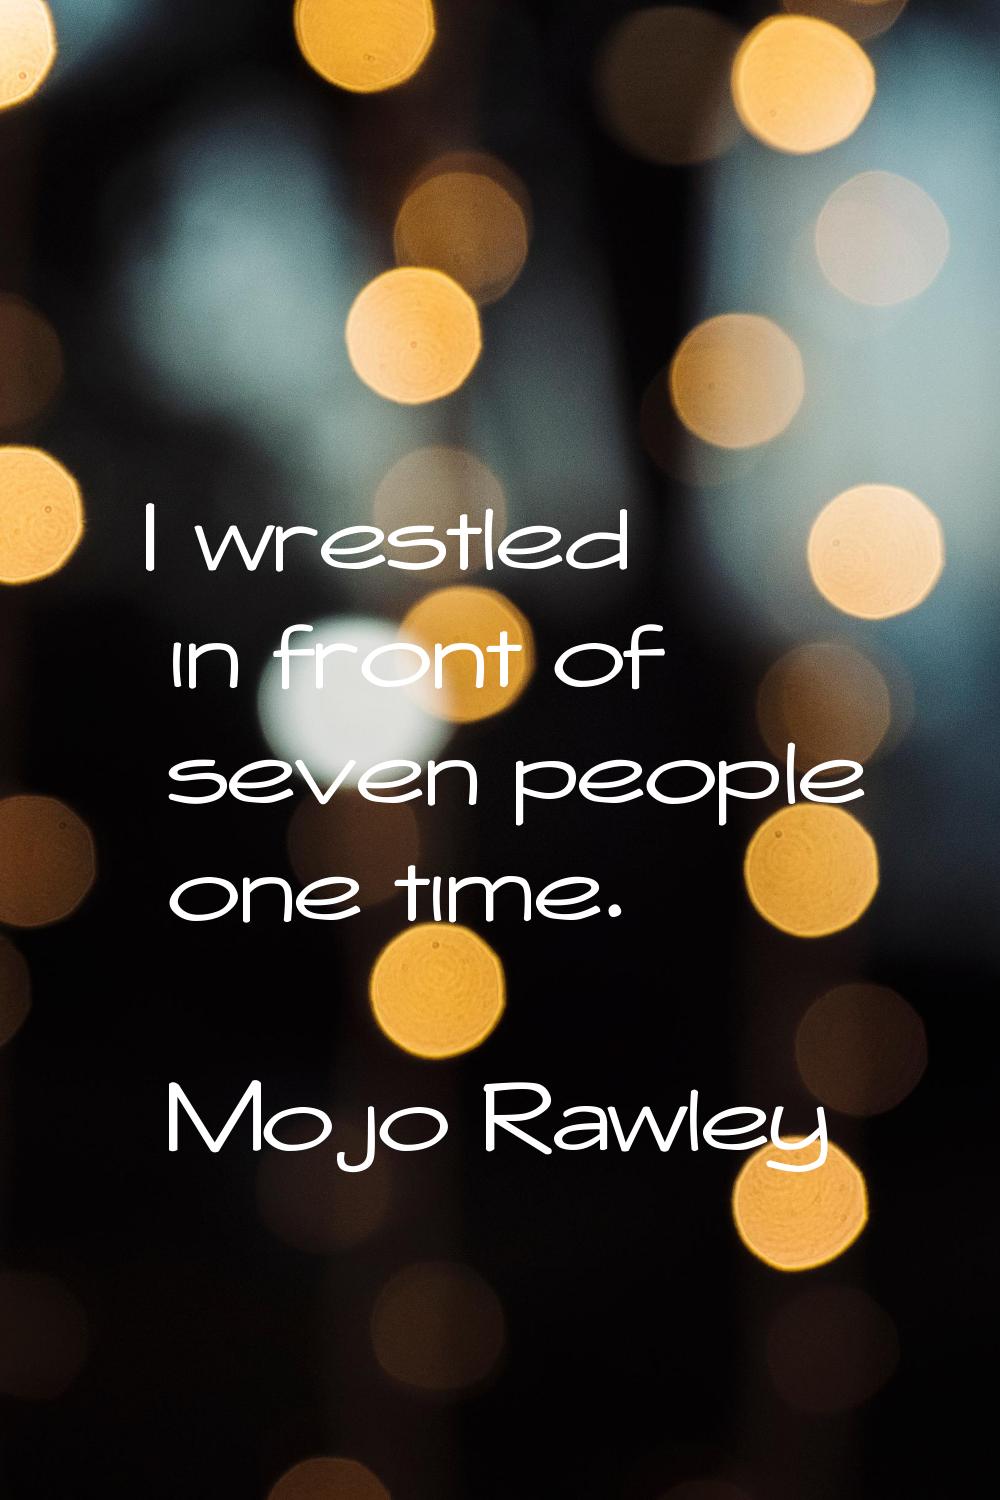 I wrestled in front of seven people one time.